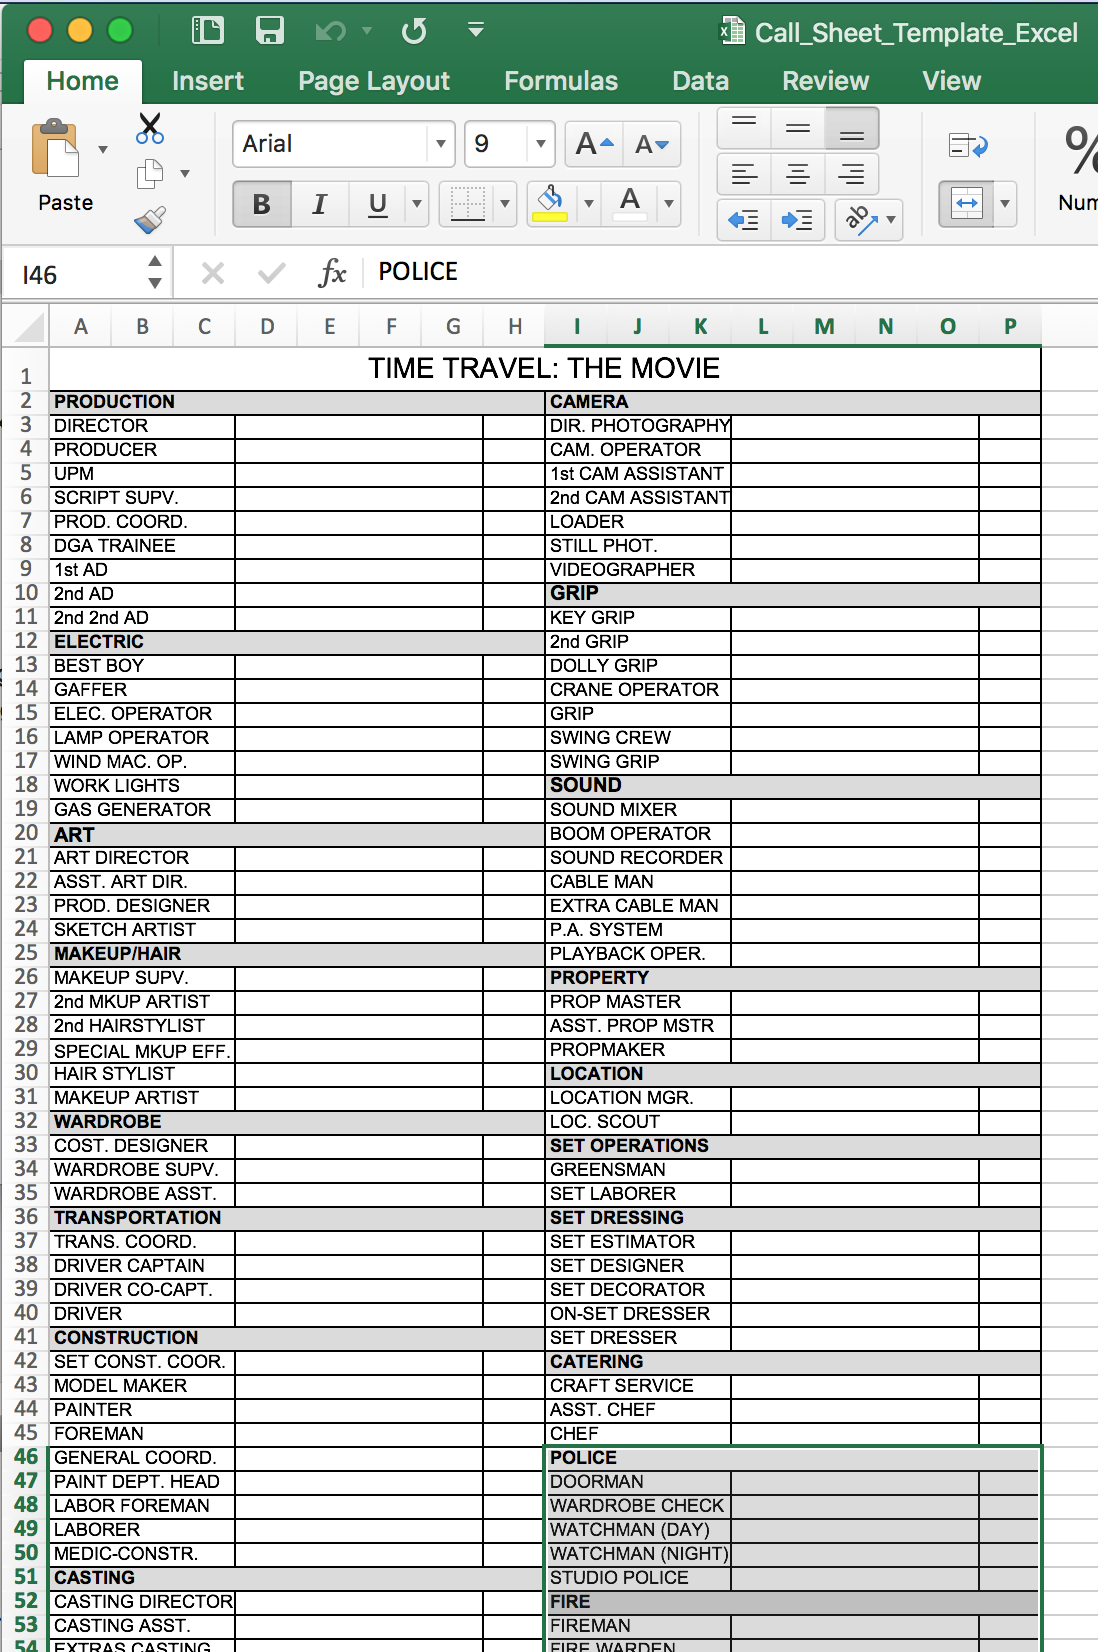 on-call-schedule-template-excel-for-your-needs